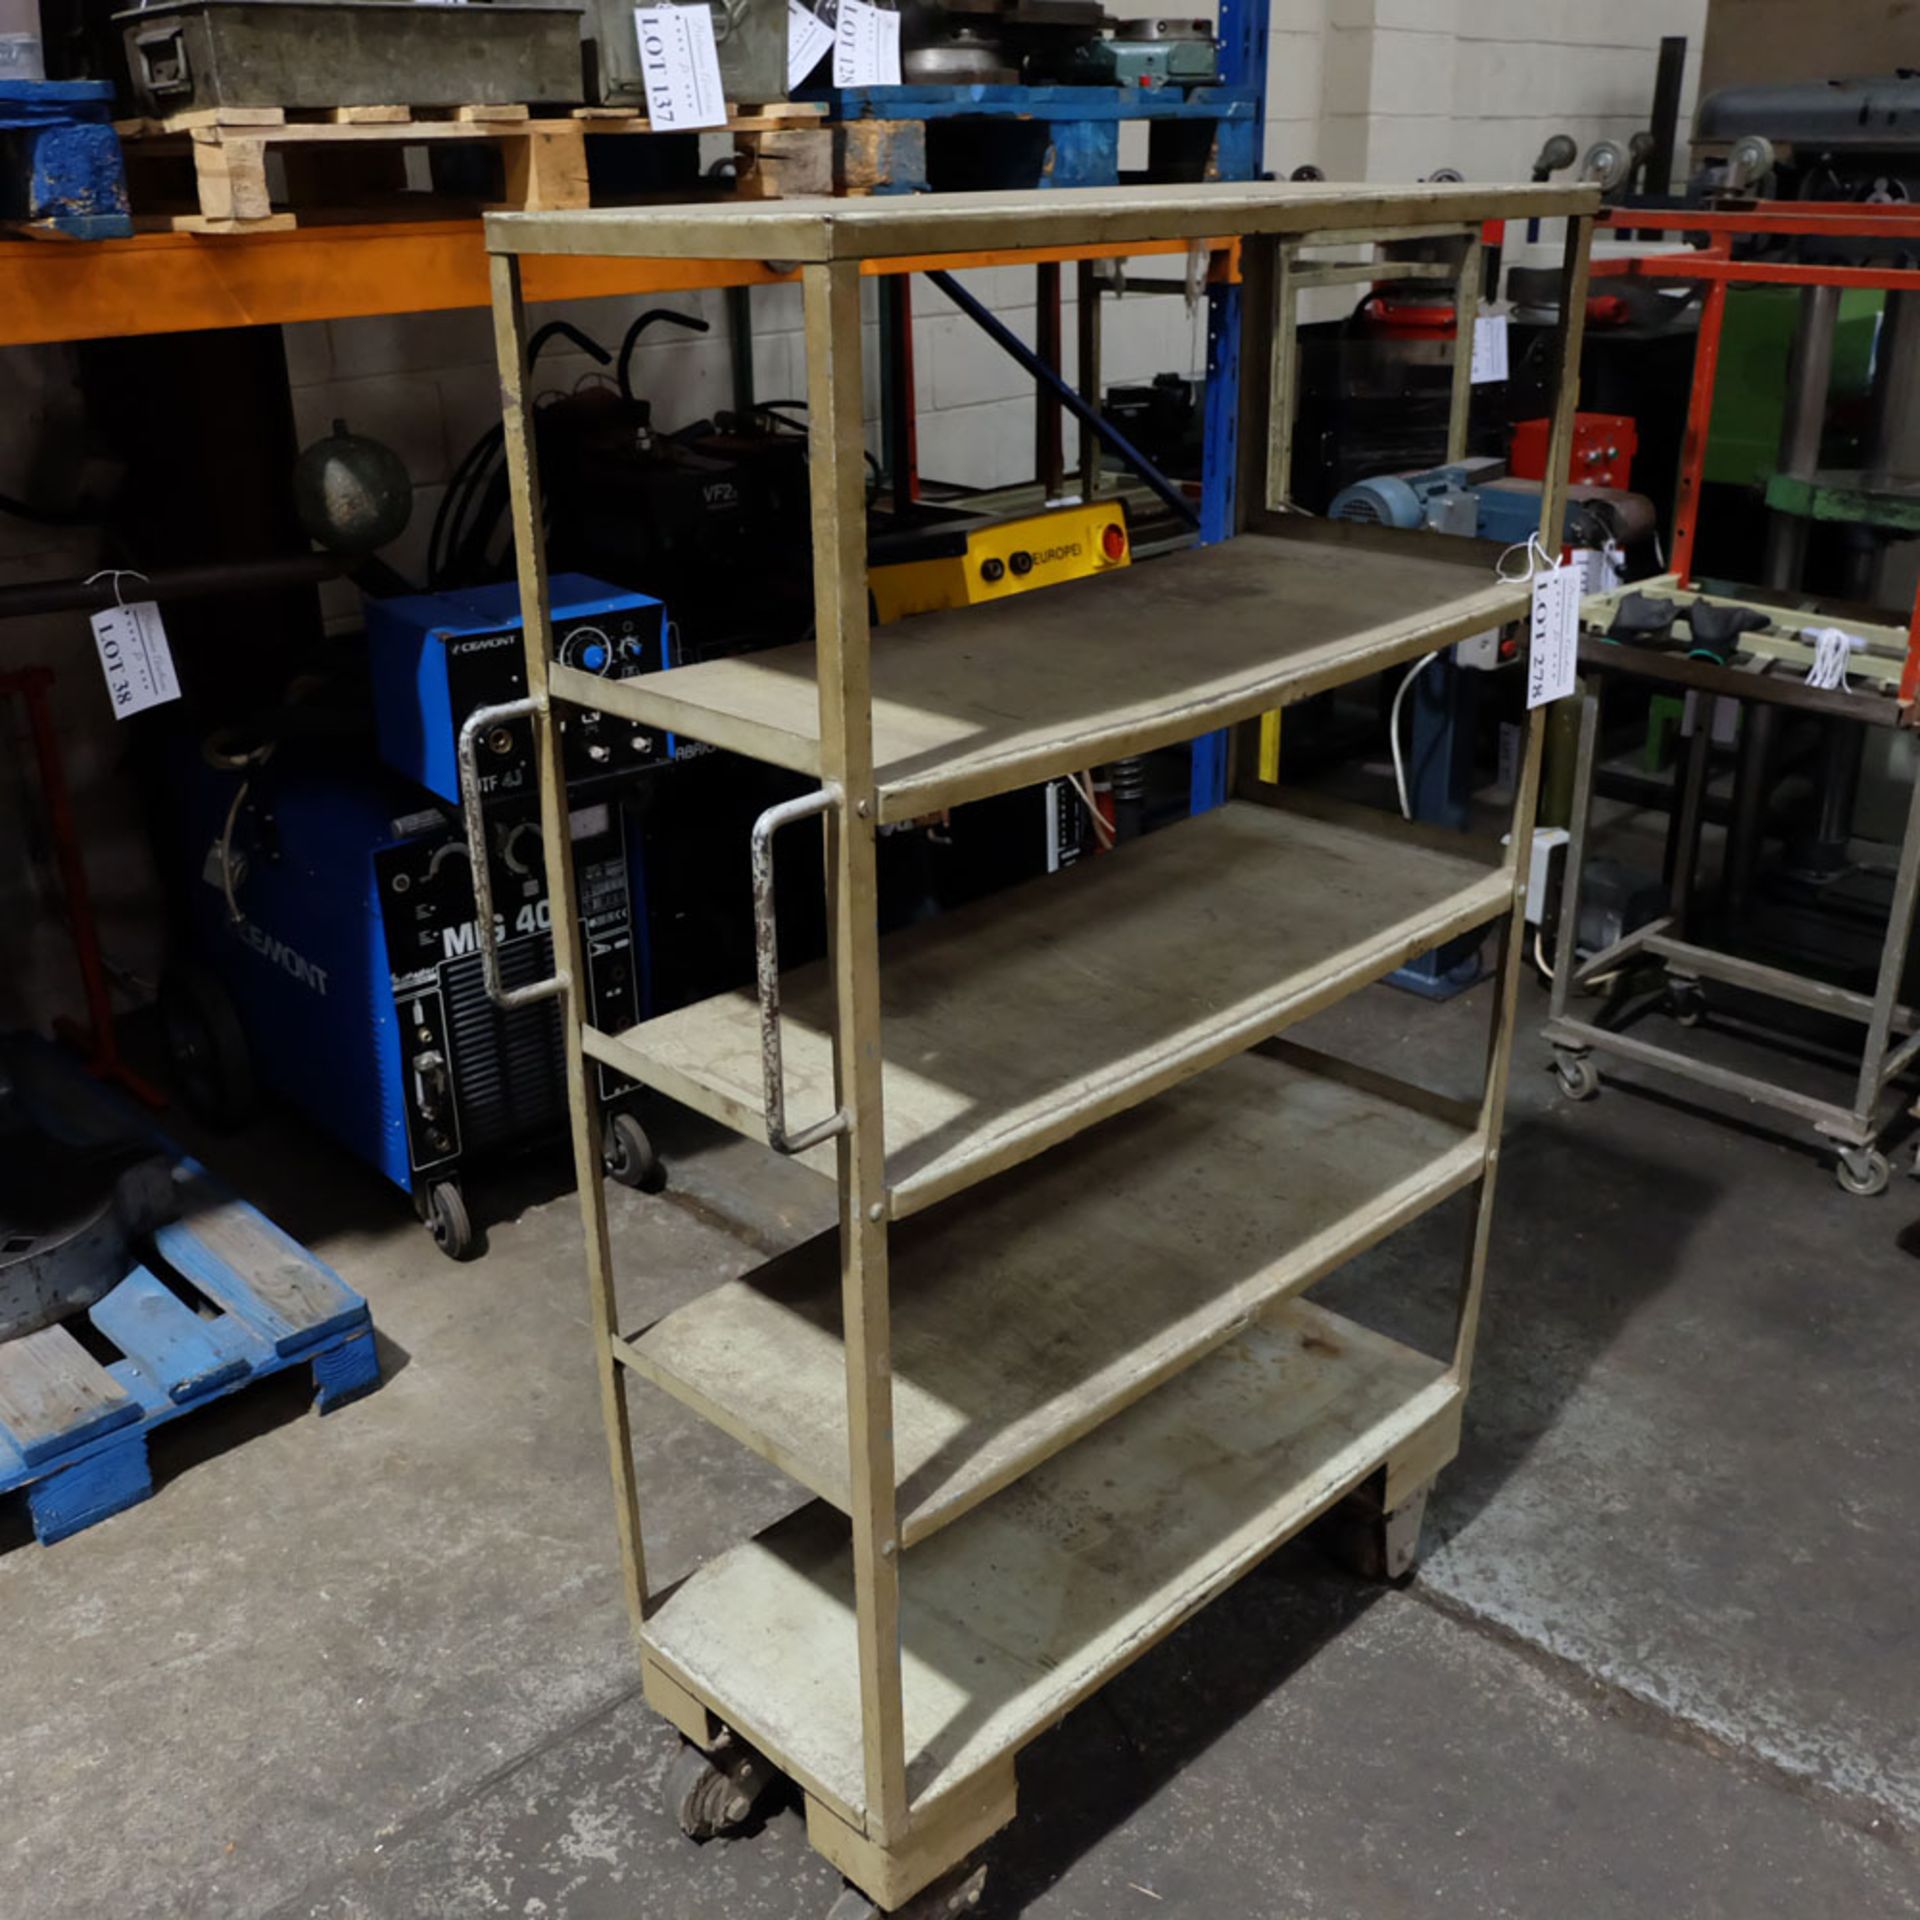 Steel Shelves. Shelf Size Approx 35 1/2" x 15 . Overall Height 60". - Image 2 of 5